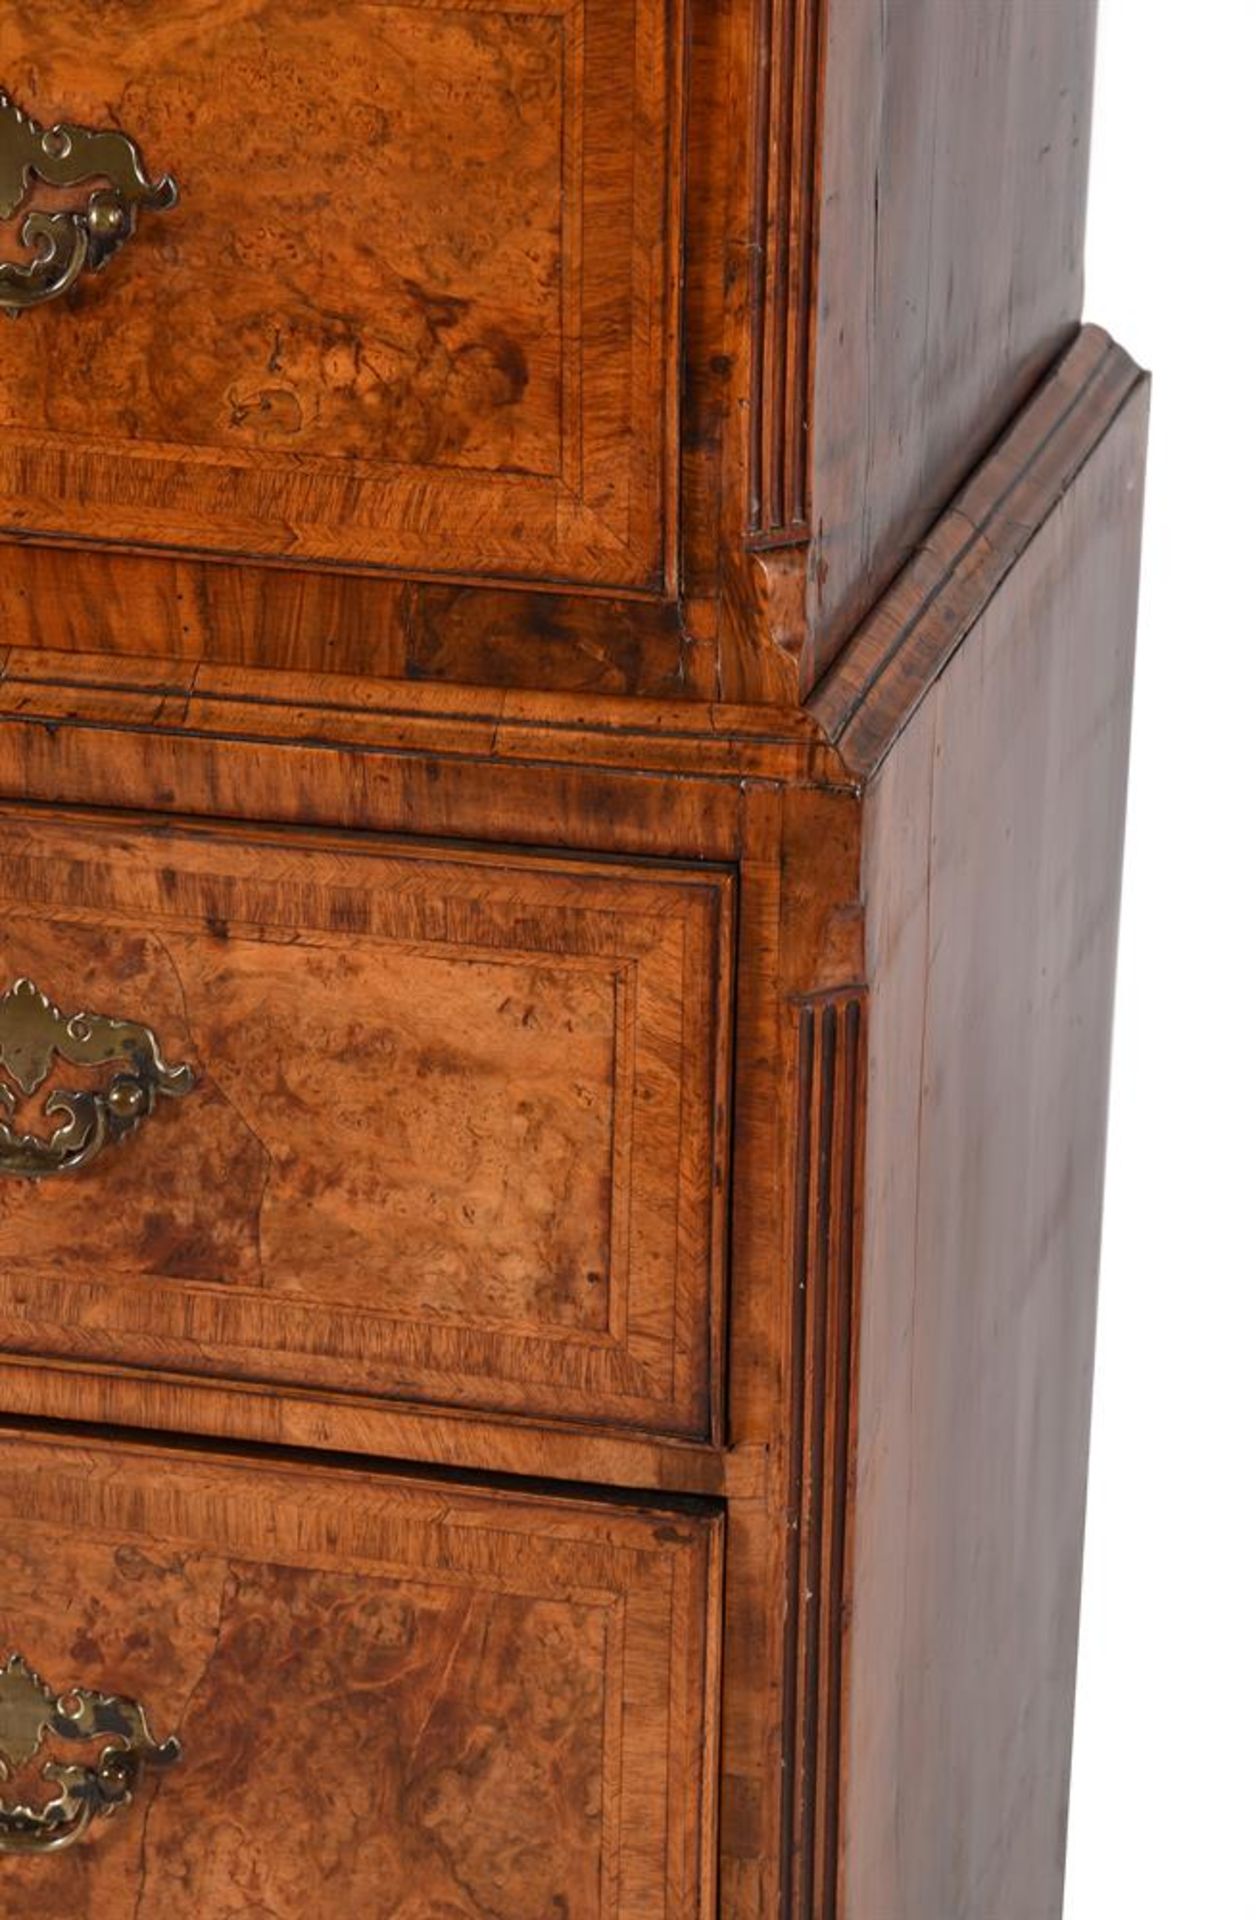 A FINE GEORGE II BURR WALNUT SECRETAIRE CHEST ON CHESTIN THE MANNER OF GILES GRENDEY - Image 4 of 7